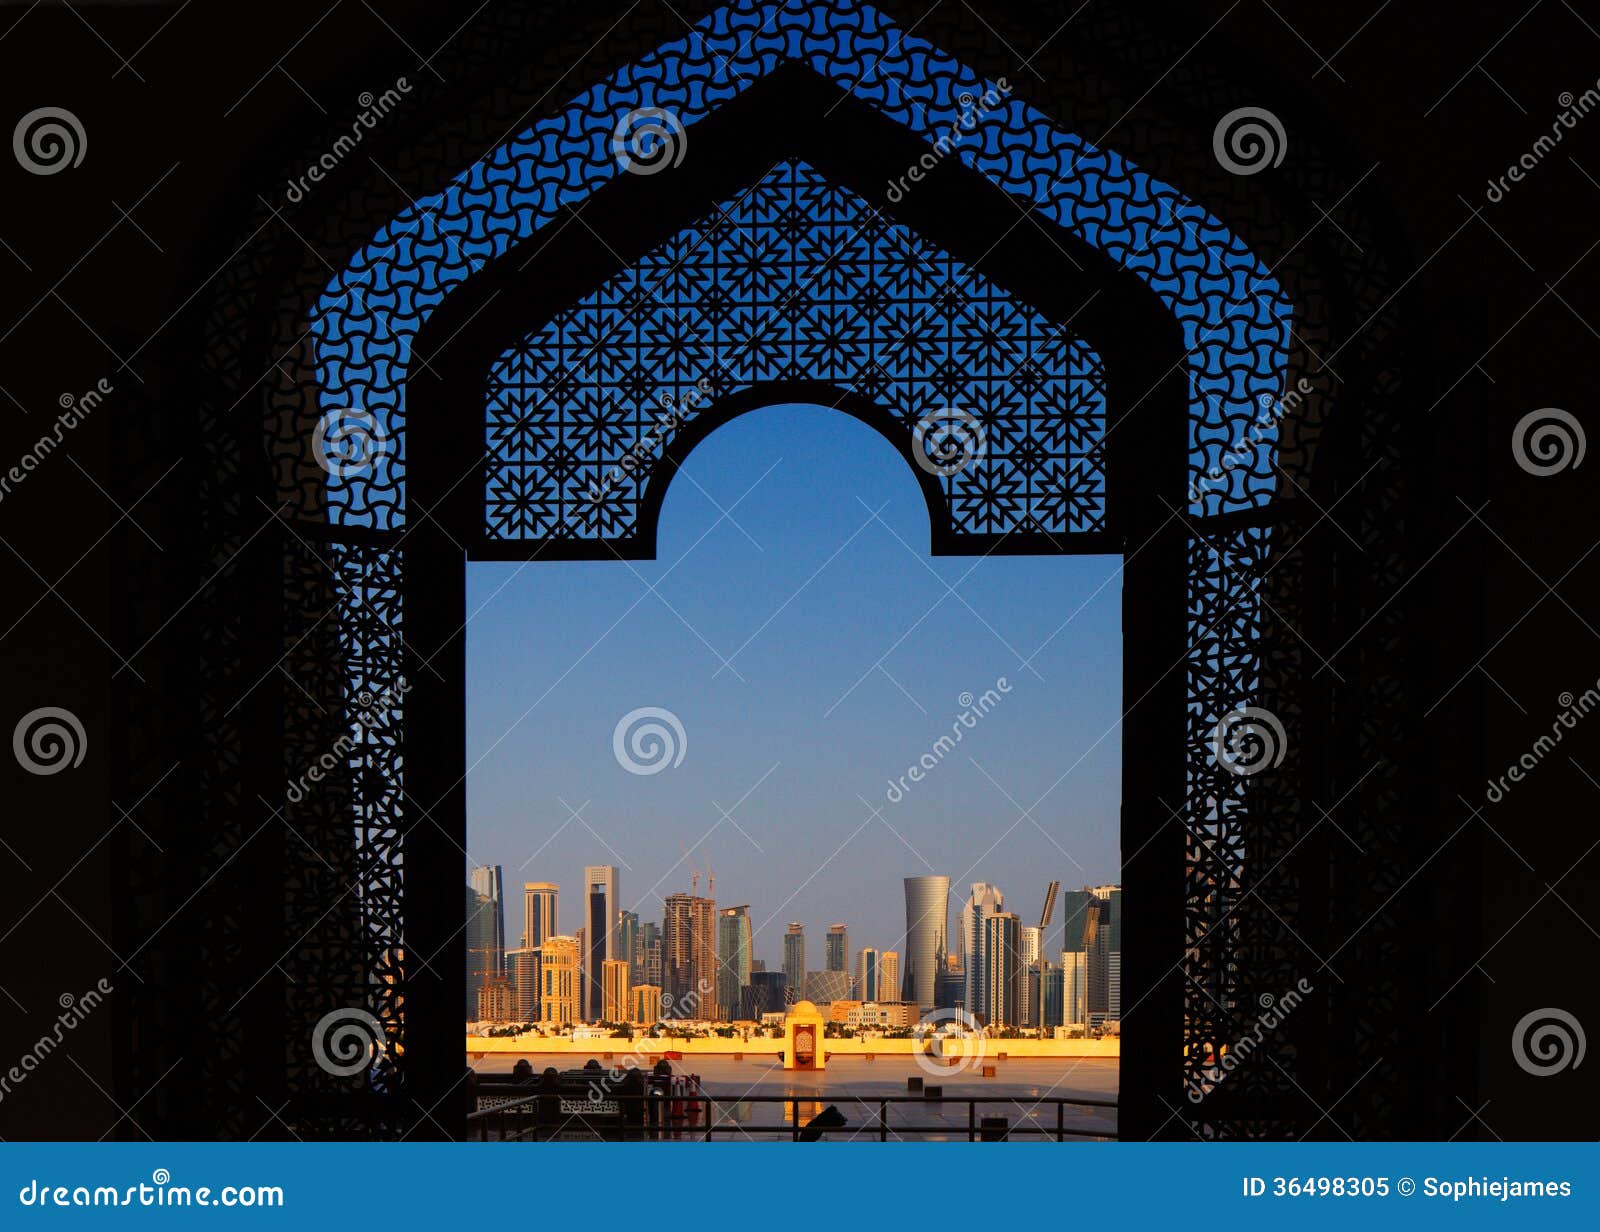 west bay city skyline as viewed from the grand mosque doha, qatar